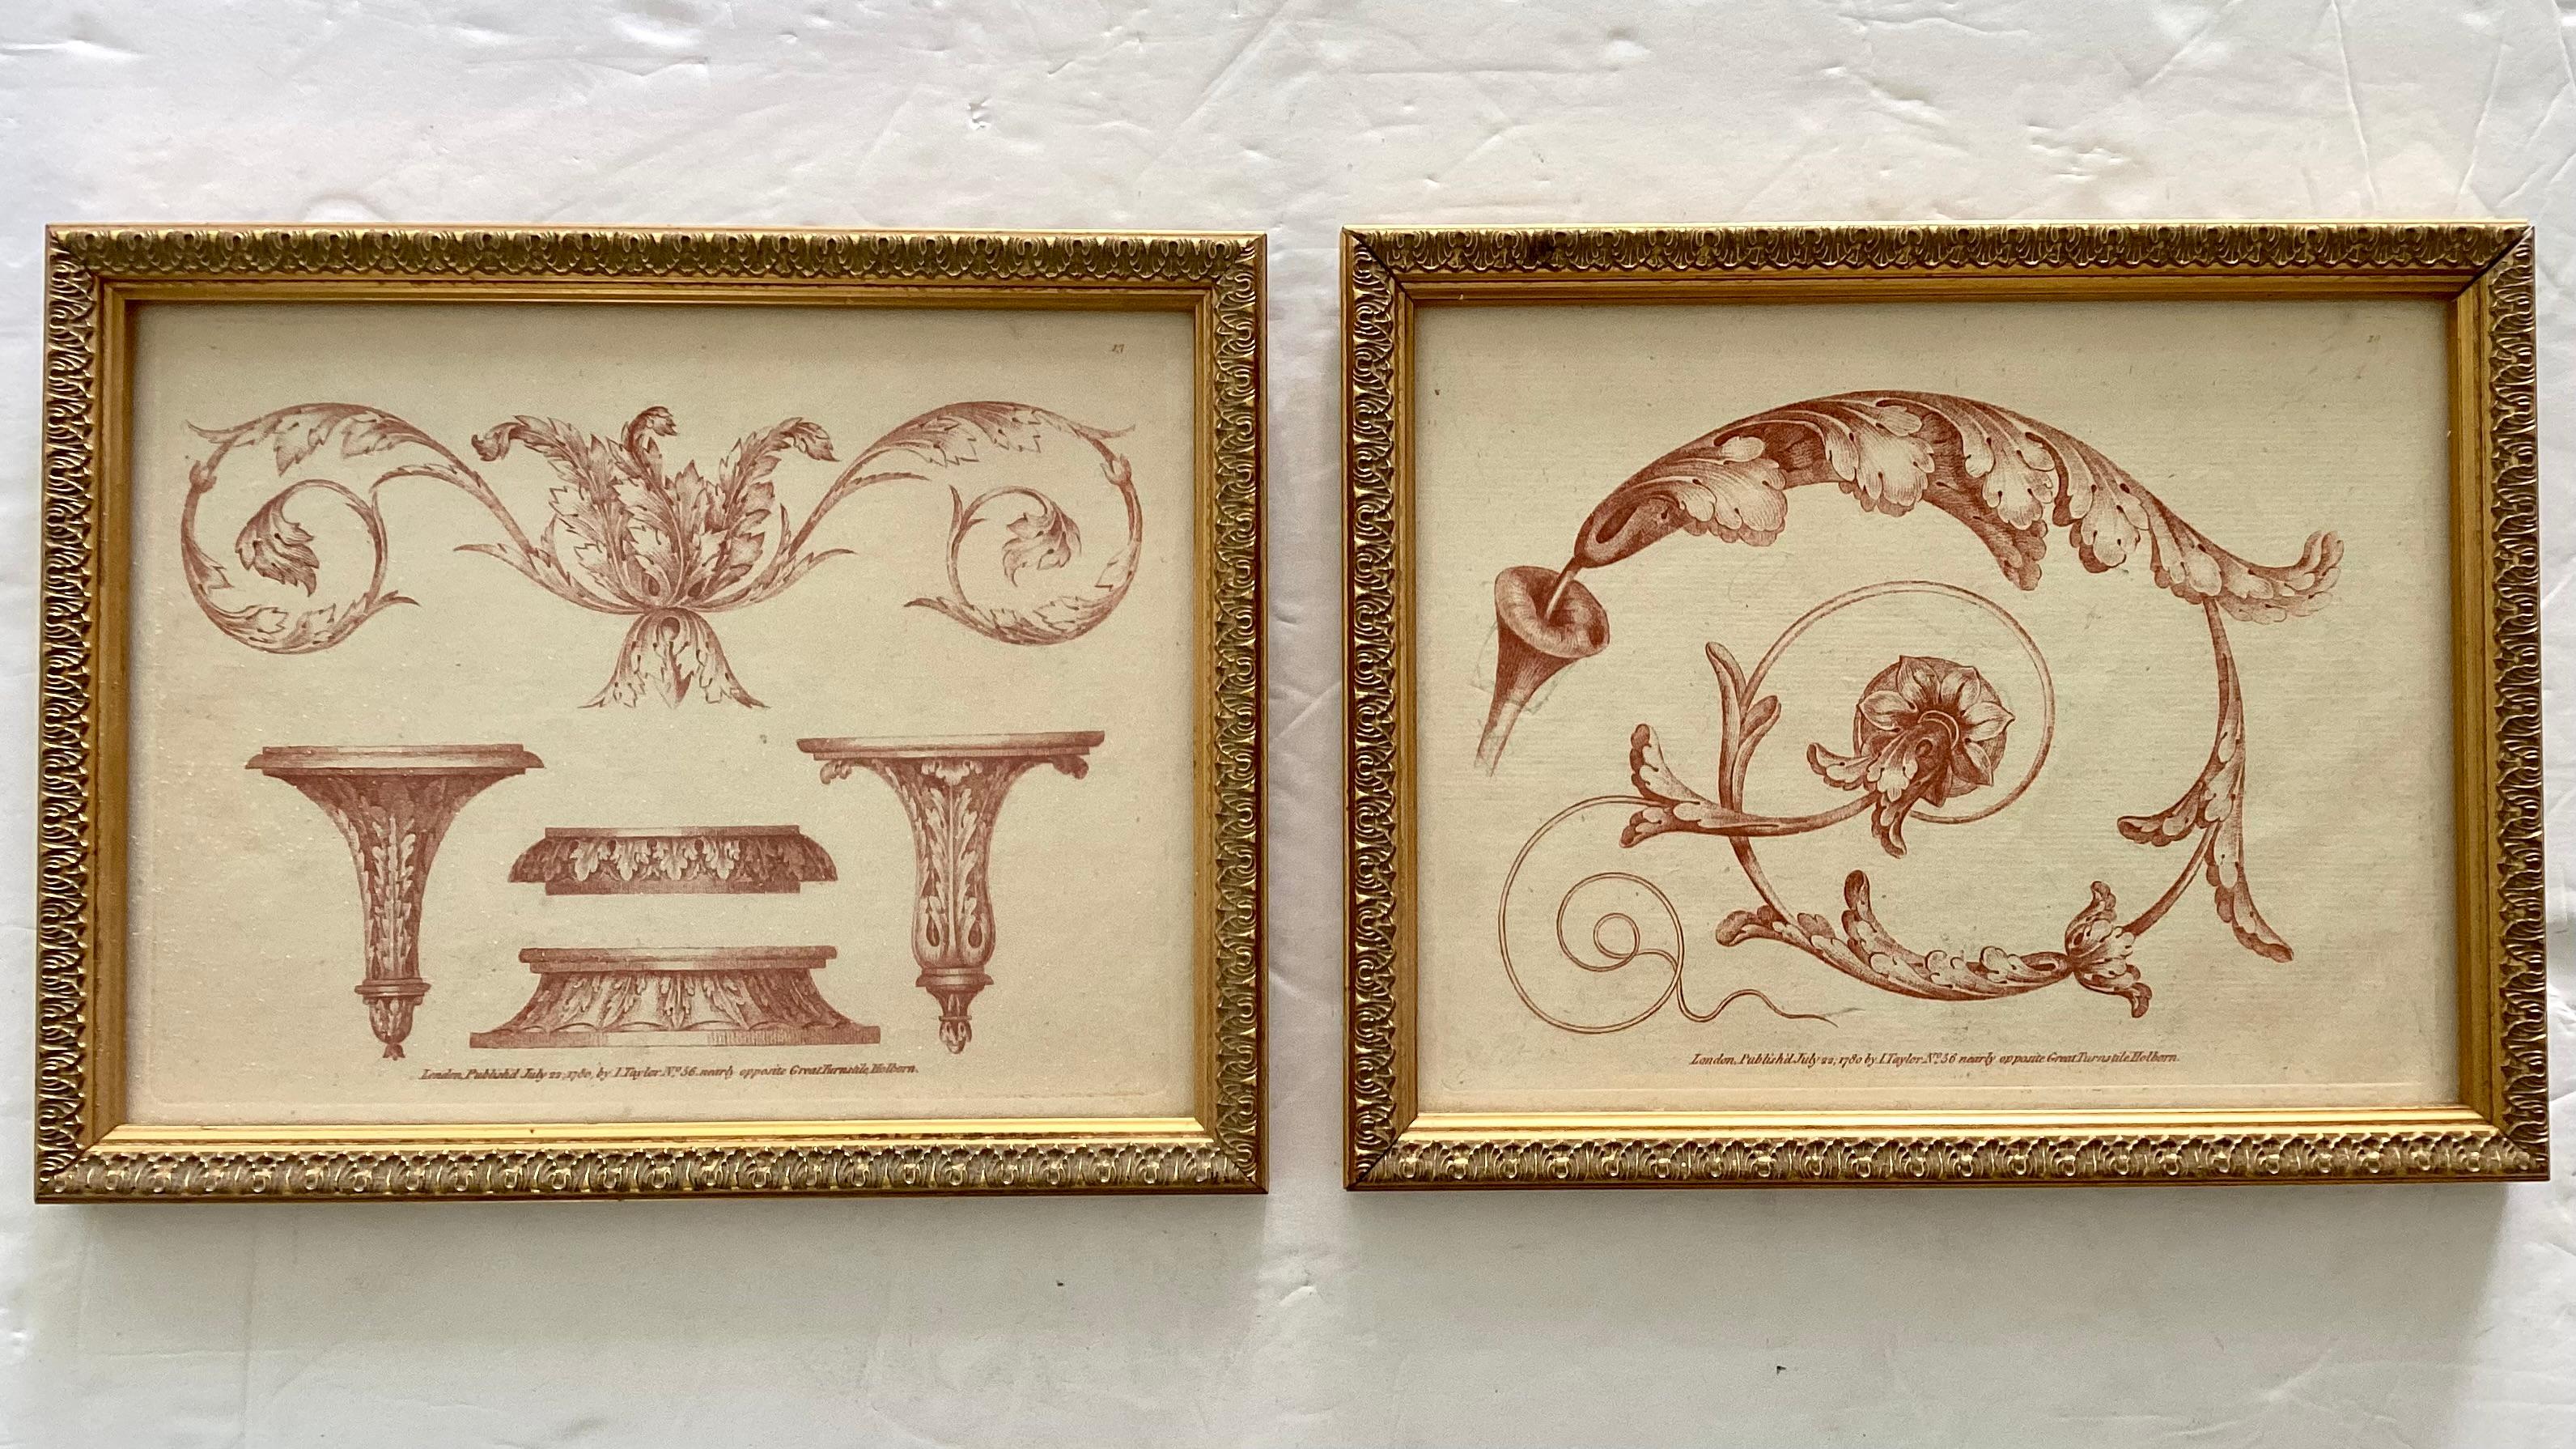 Pair of etchings in nice wood gold frame. We have other similar set in our listing so collect them all.